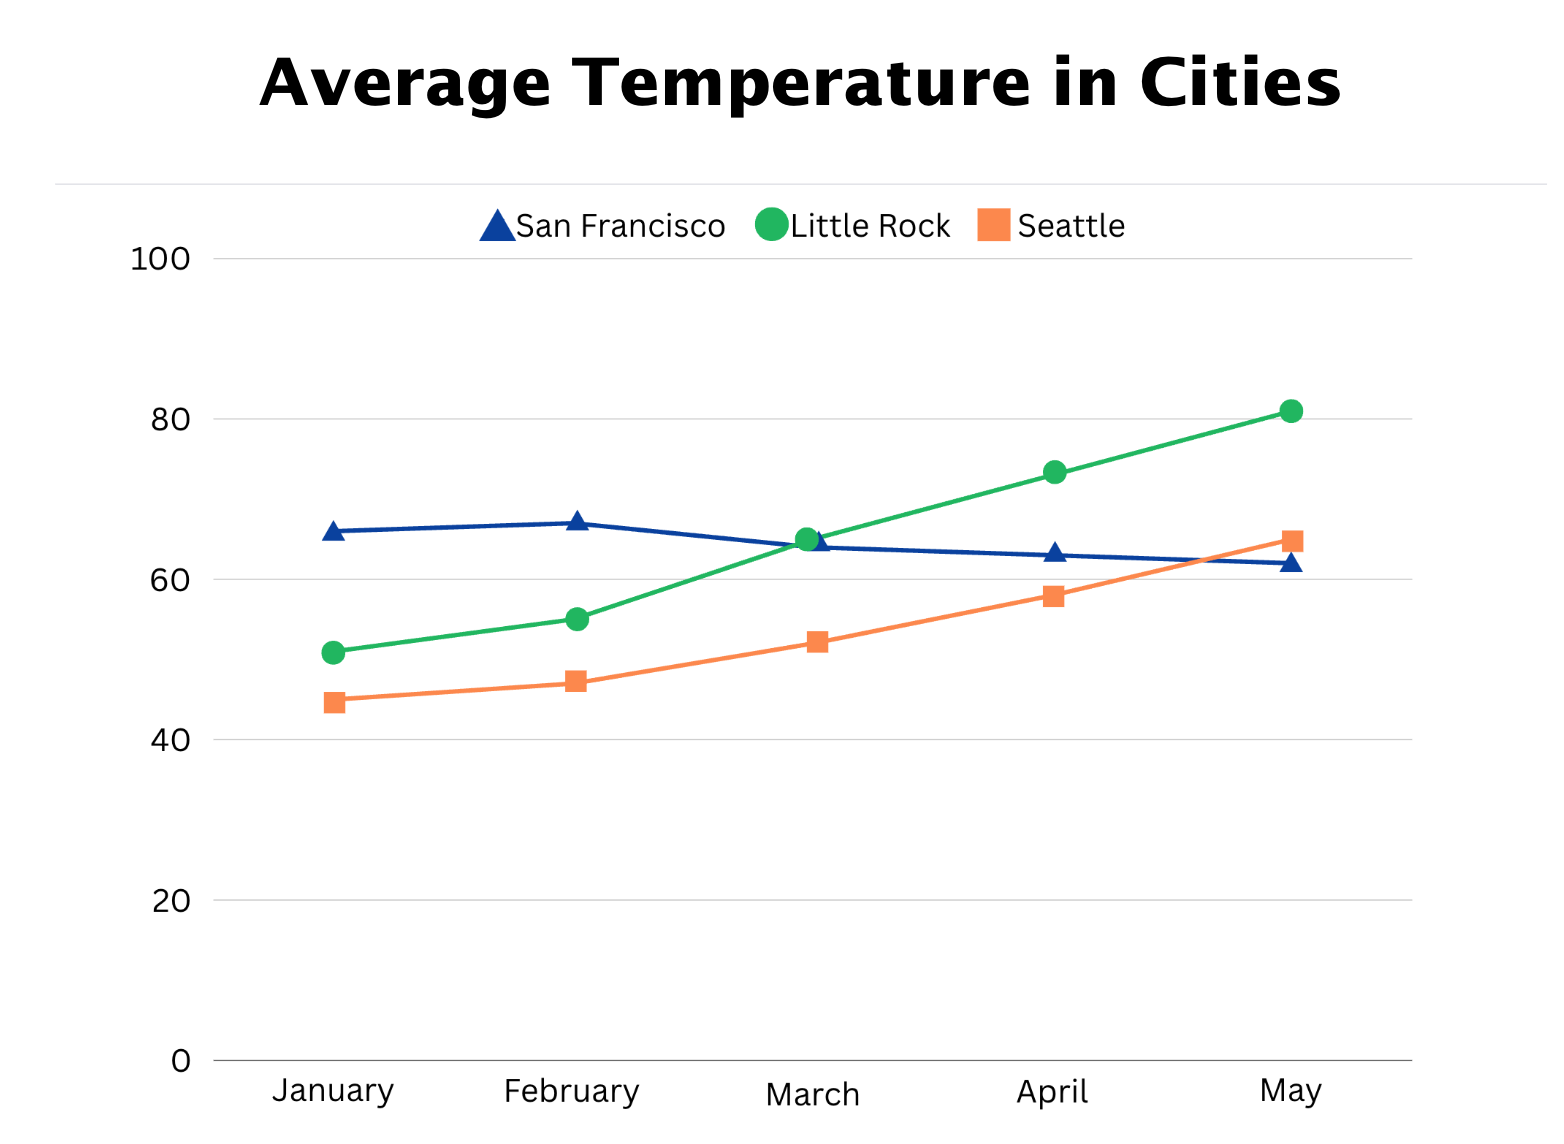 Average temperature of three cities over 5 months. This chart has shapes added to the line graph which makes it easier to read and understand. 